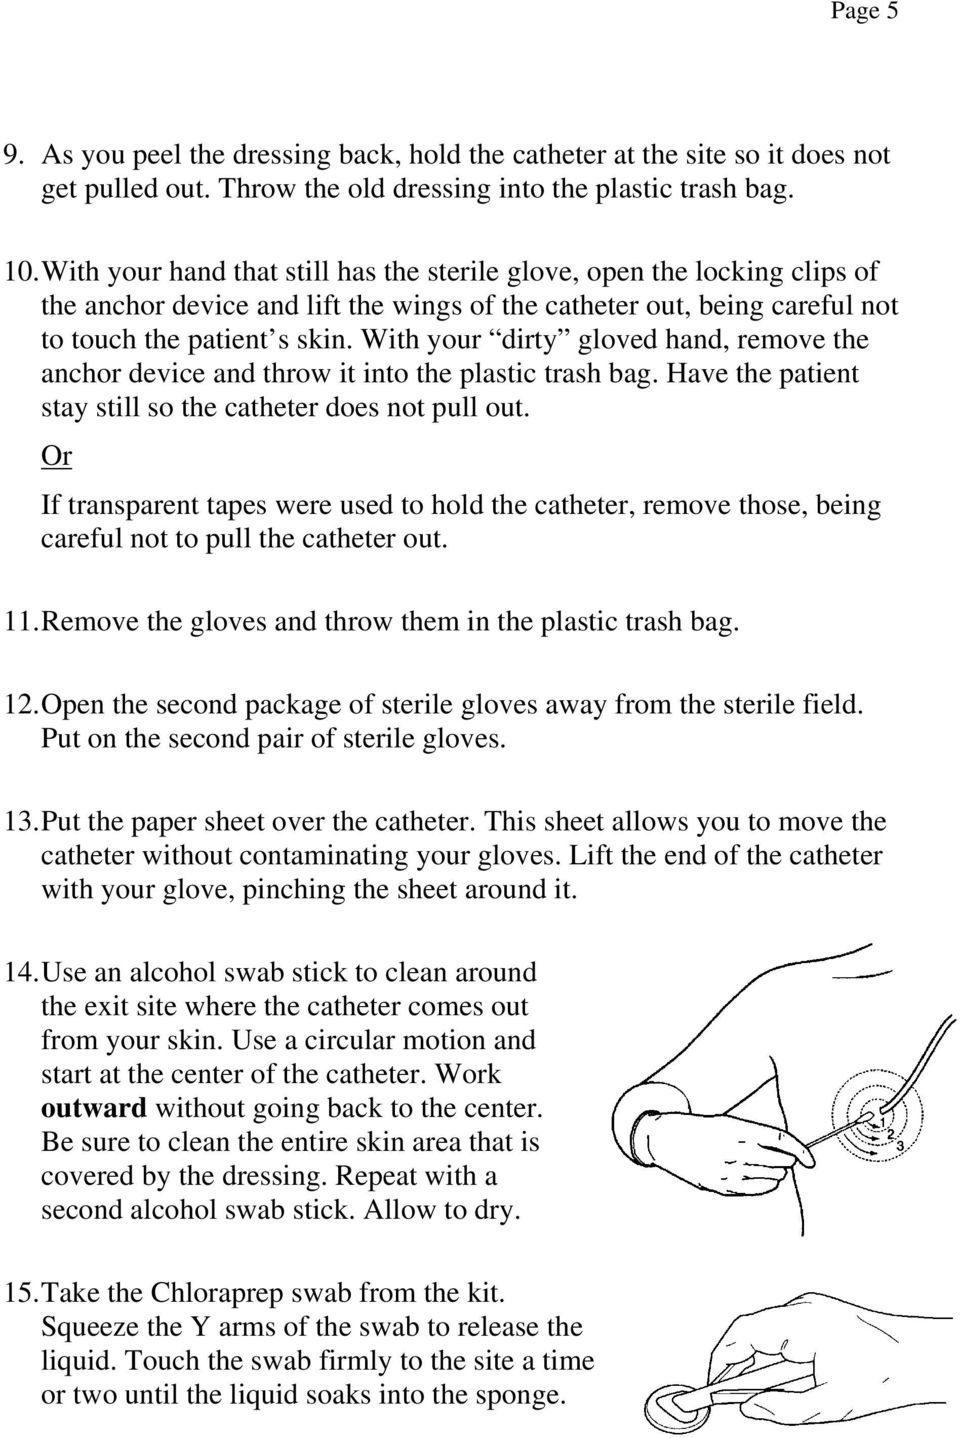 With your dirty gloved hand, remove the anchor device and throw it into the plastic trash bag. Have the patient stay still so the catheter does not pull out.